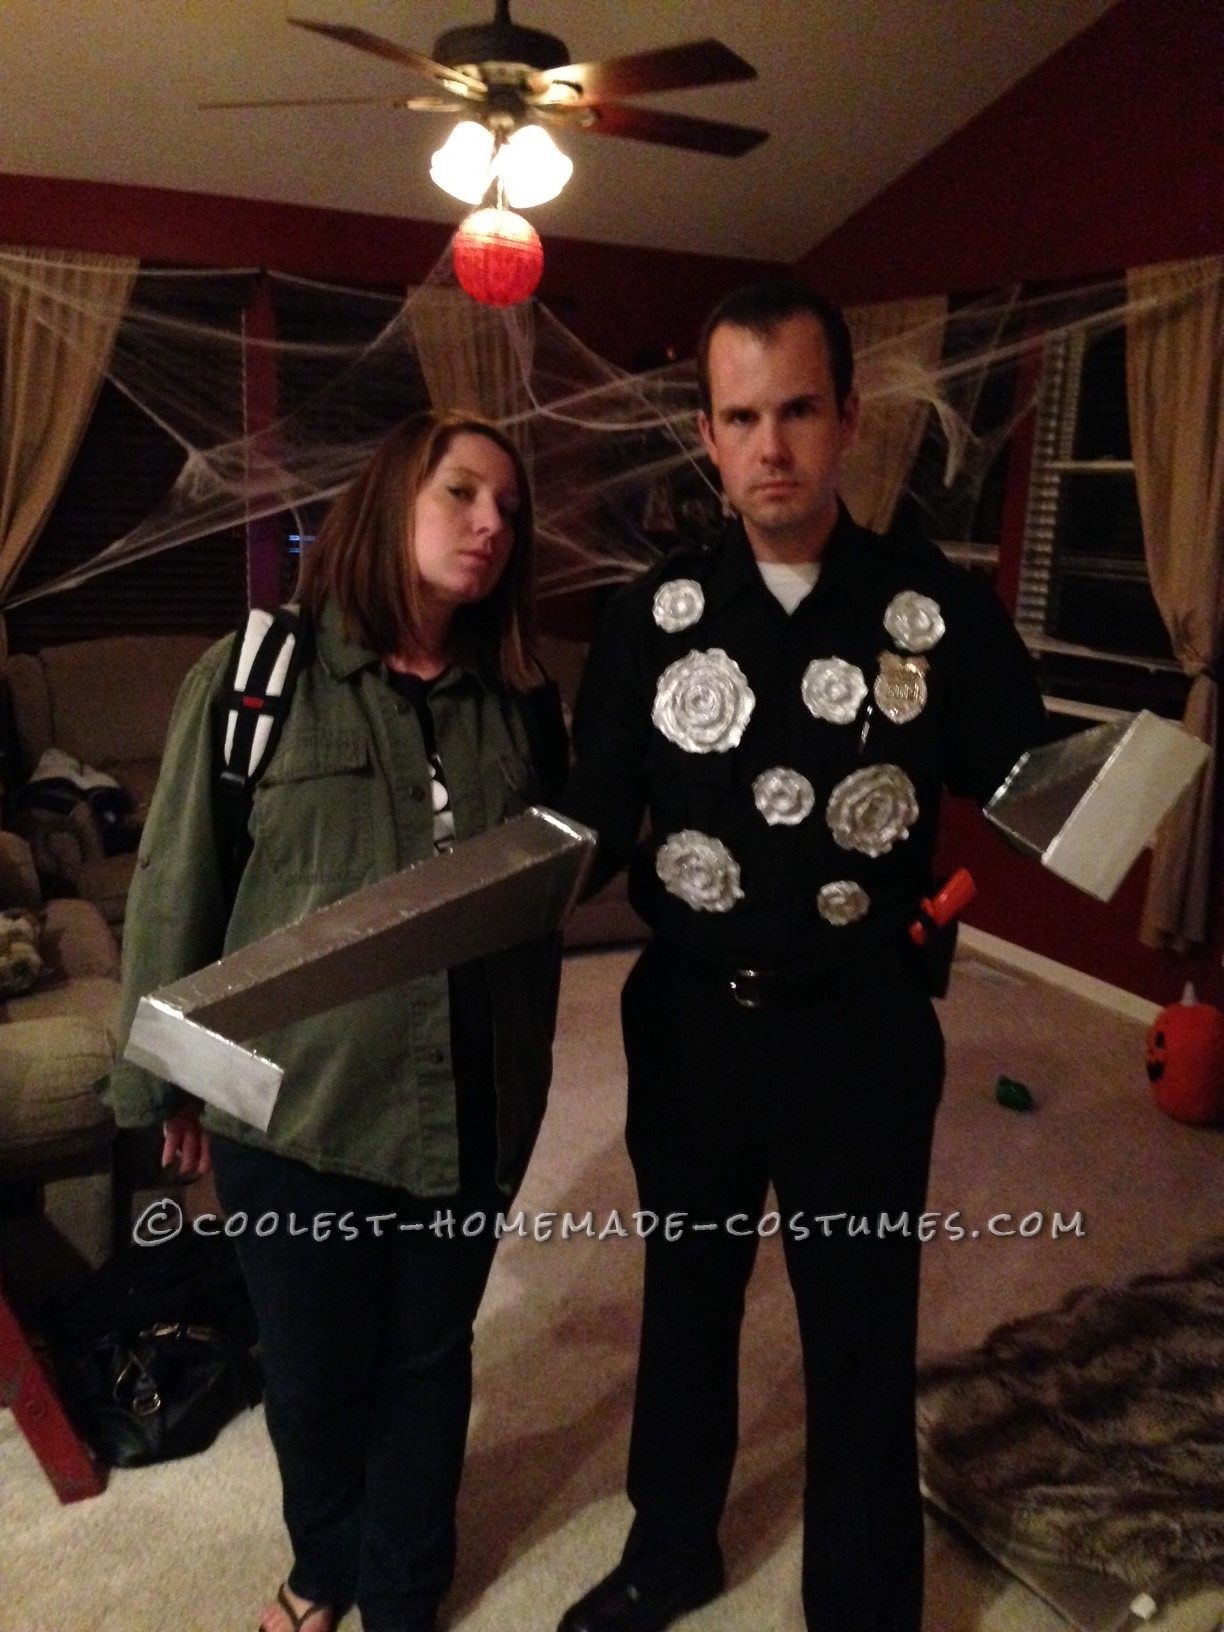 Best Terminator Couple Costume: T-1000 as he Chases John Connor out of the Mental Hospital